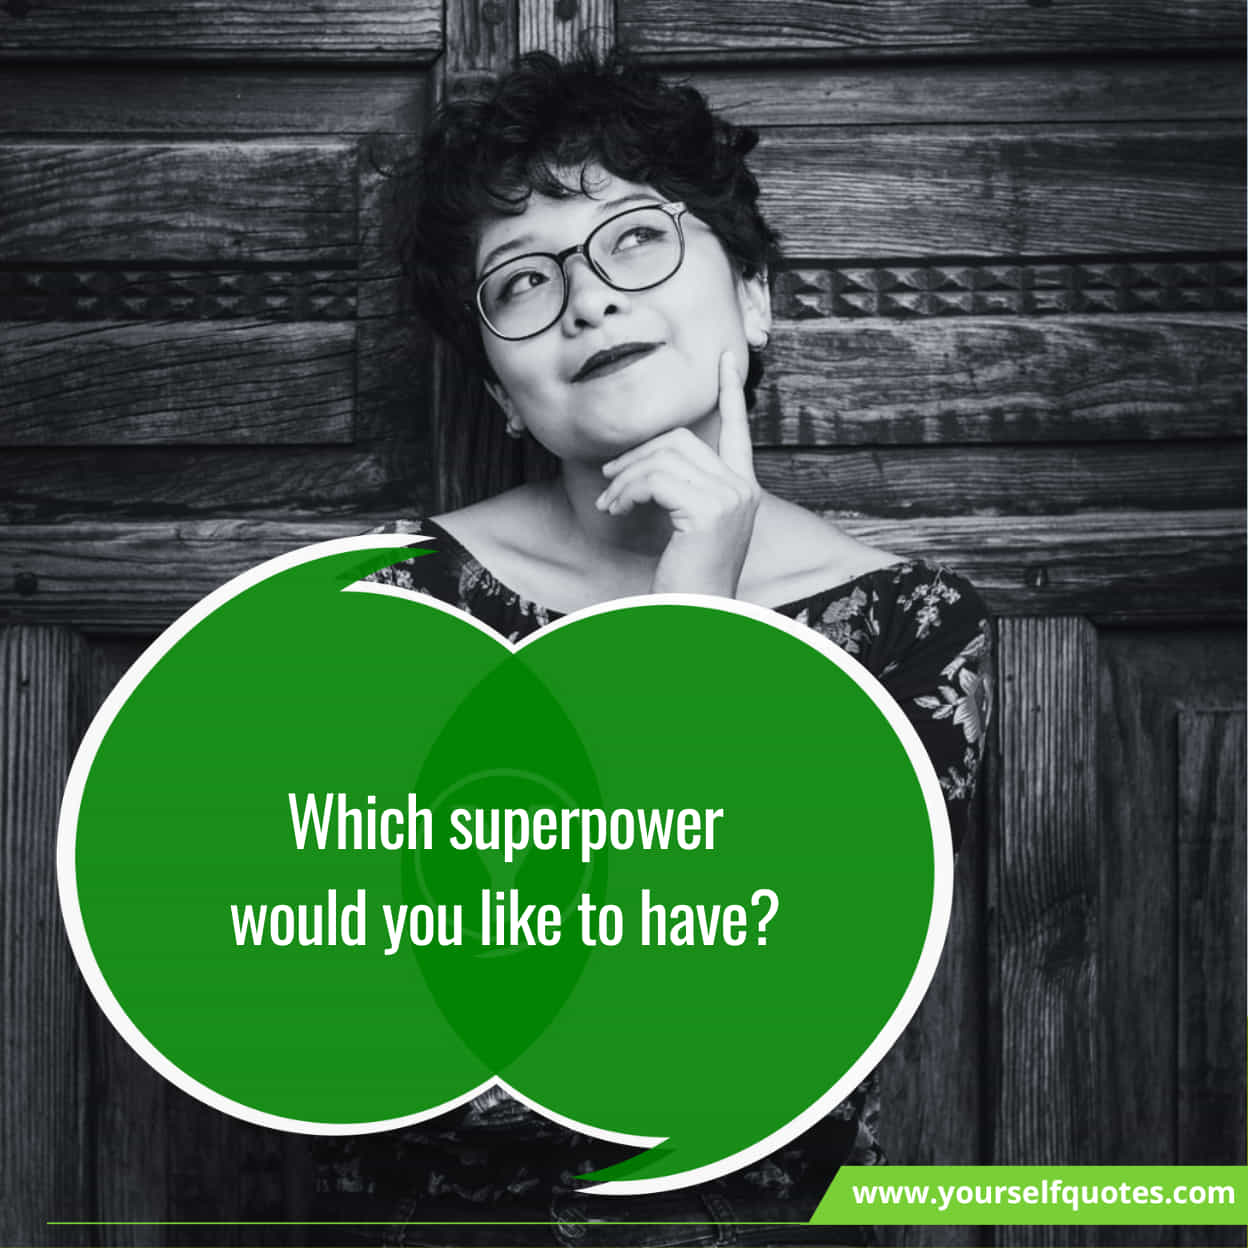 Funny Deep Questions On Getting Superpower